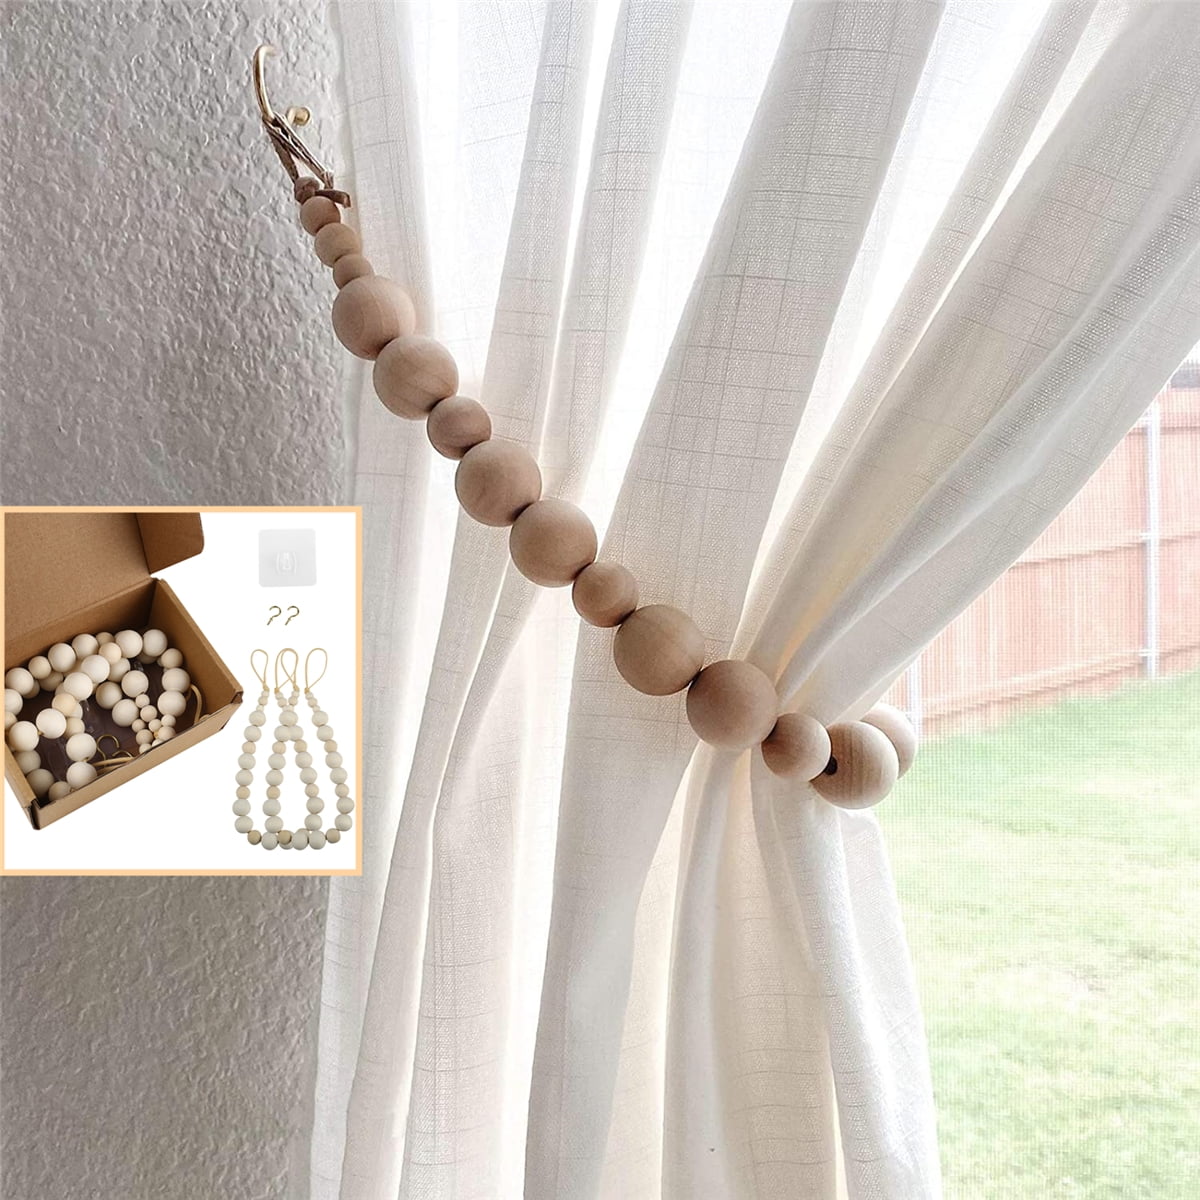 Chictie Handmade Wood Beads Holdbacks Tieback,2 Pieces Decorative Off White Curtain Rope Indoor Outdoor Use,30.7 inch for Big,Wide or Thick Window Drapries